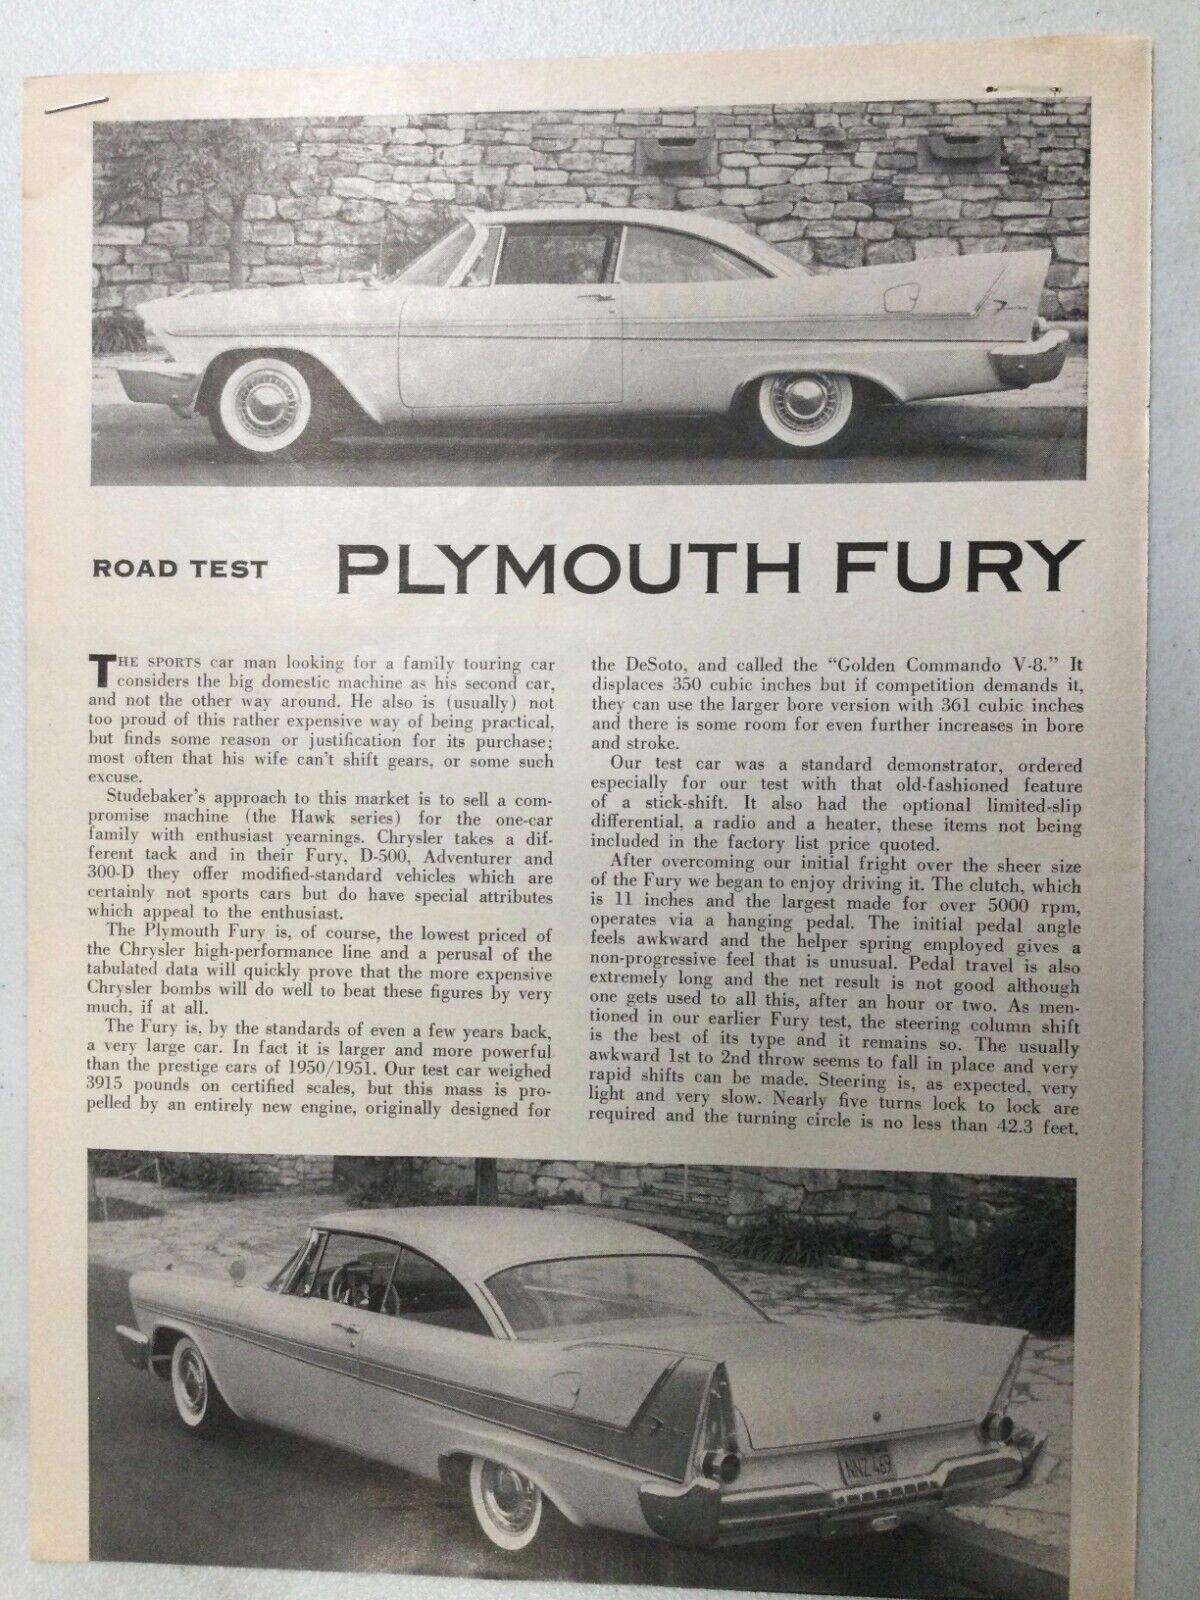 PPPArt64 Article Road Test 1958 Plymouth Fury March 1958 3 page